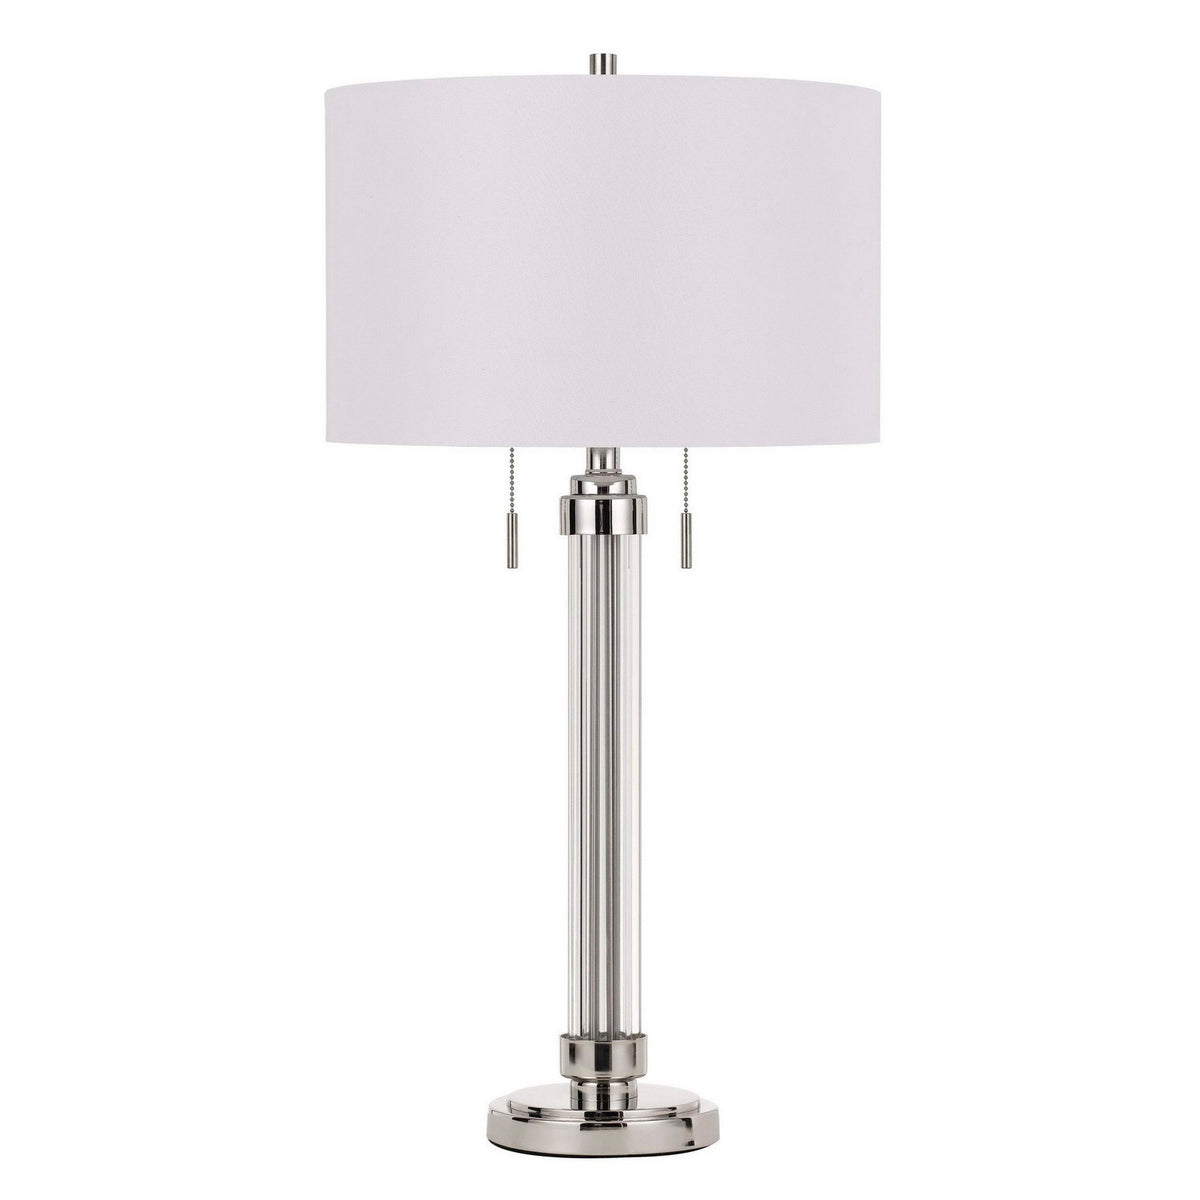 60 X 2 Watt Metal and Acrylic Table Lamp with Fabric Shade, White and Silver - BM224779